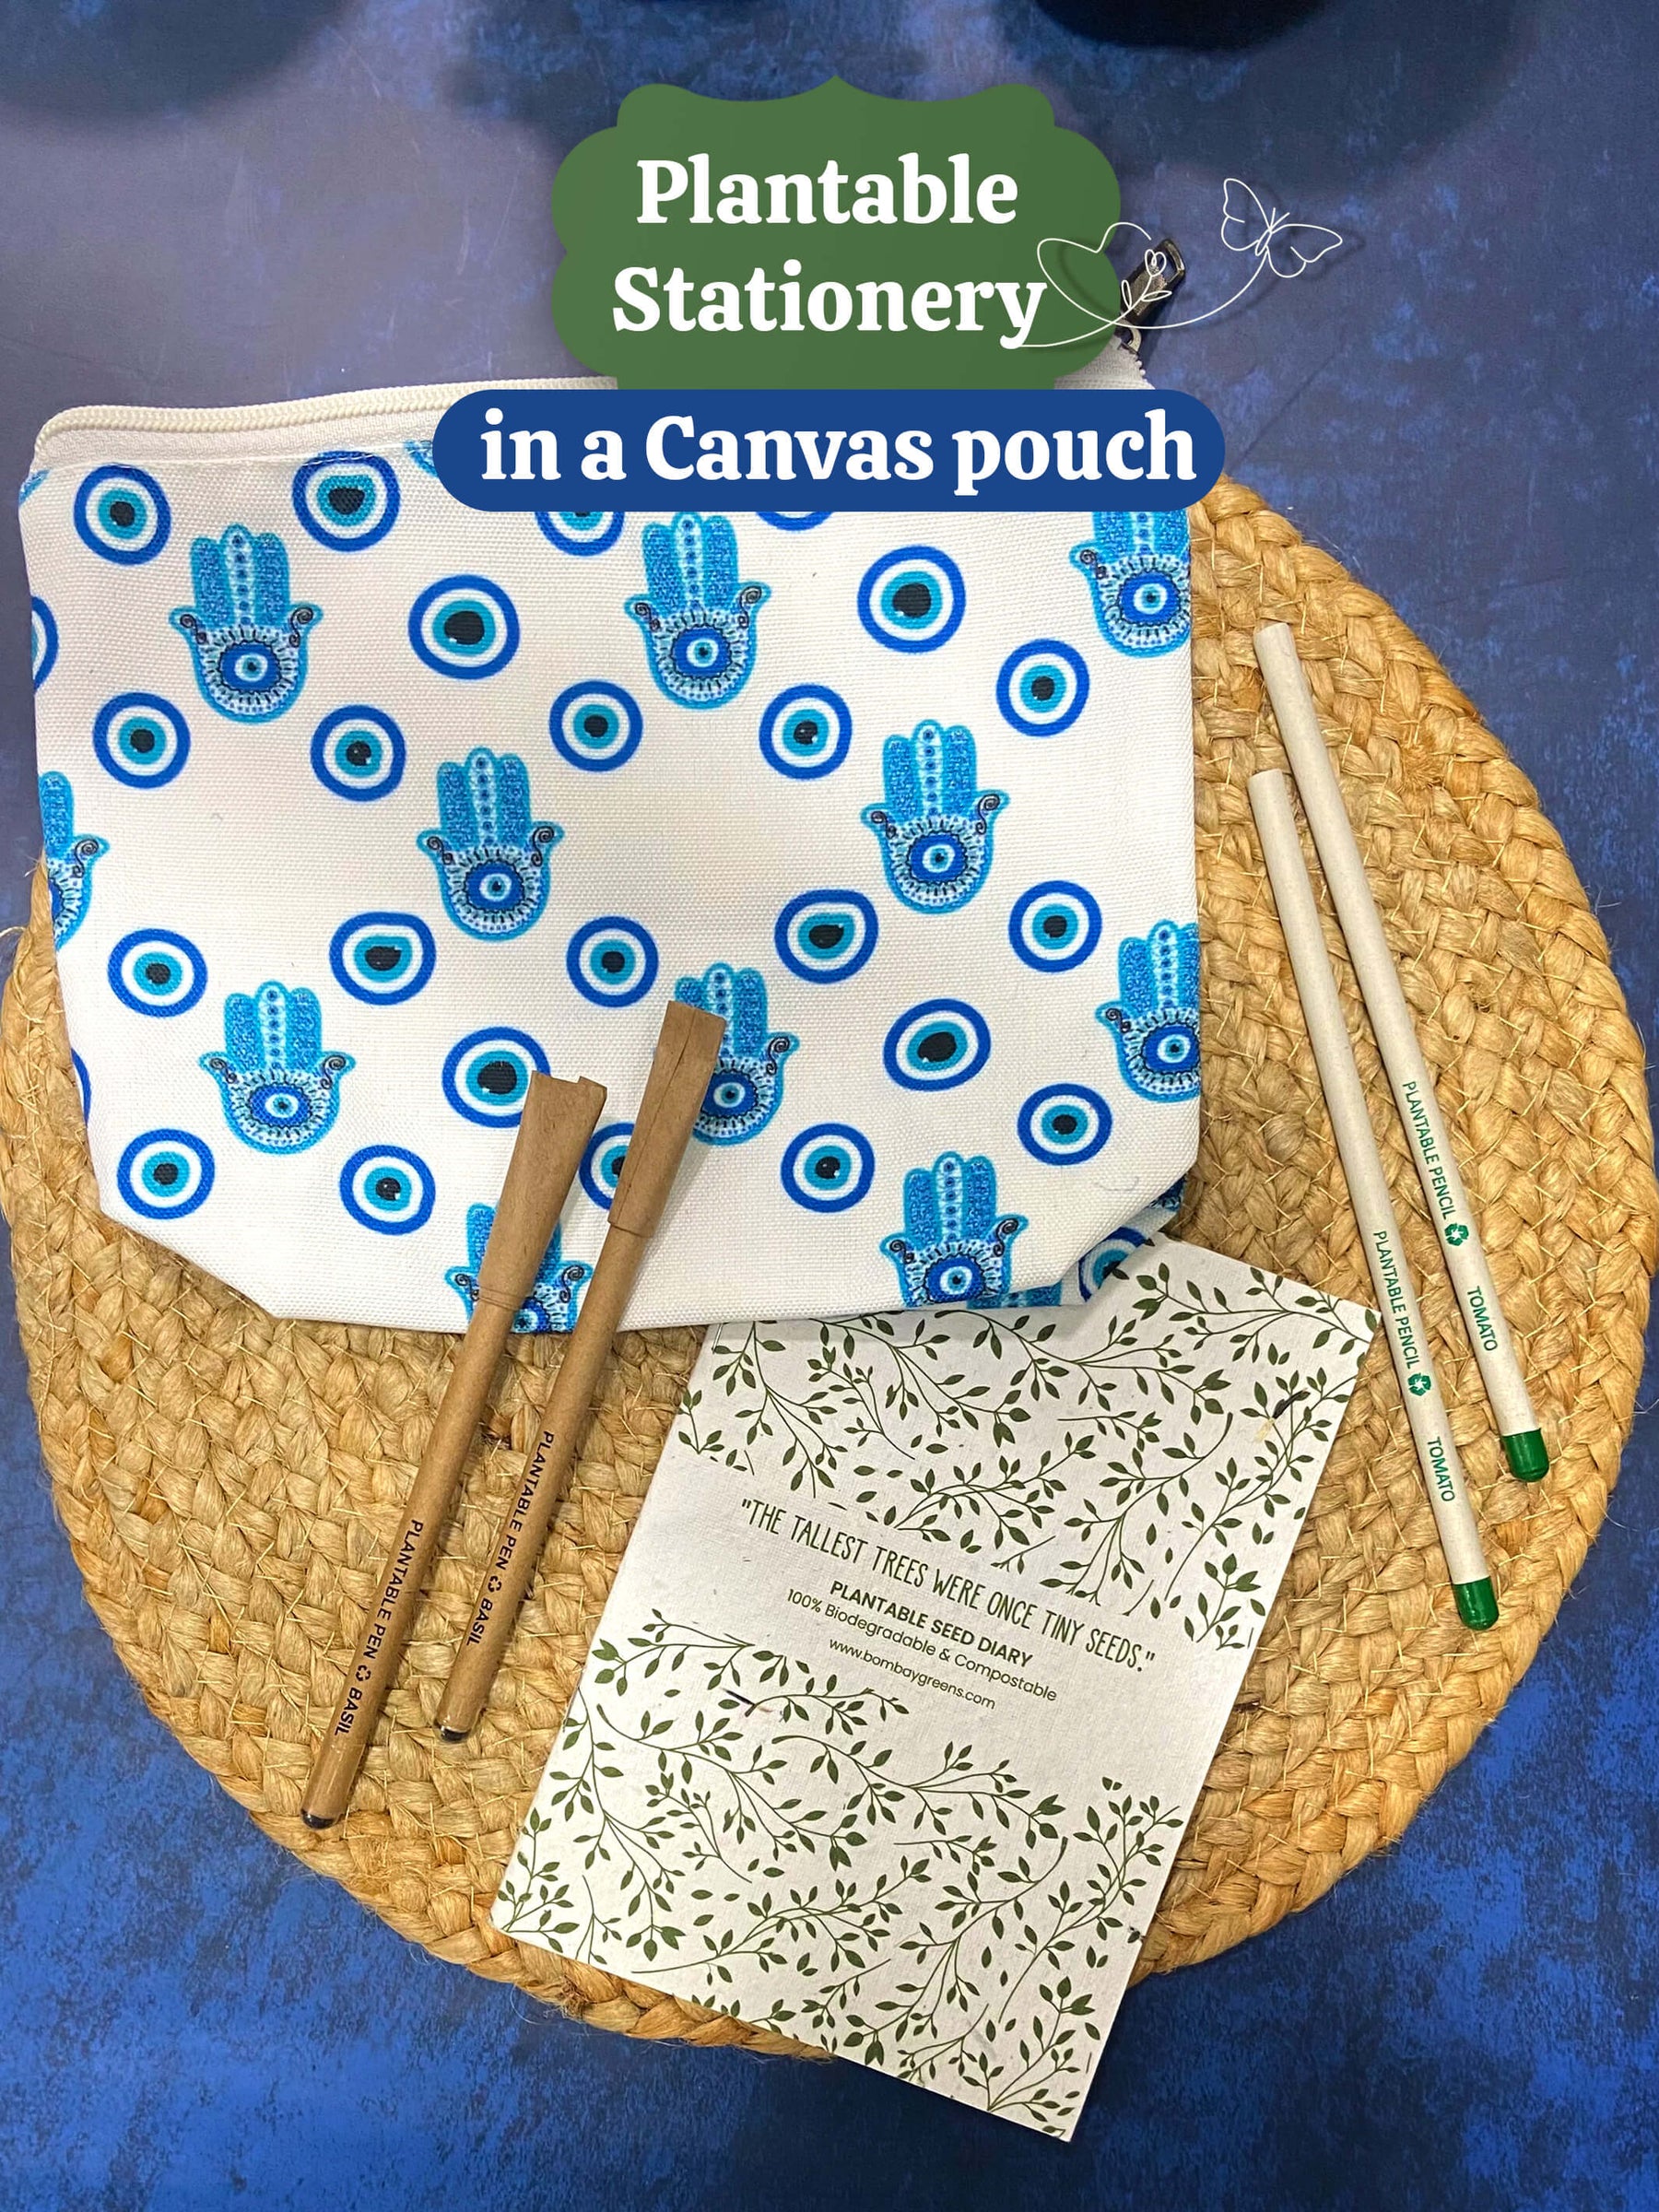 Plantable Stationery - Canvas Pouch, Seed Pen & Pencil